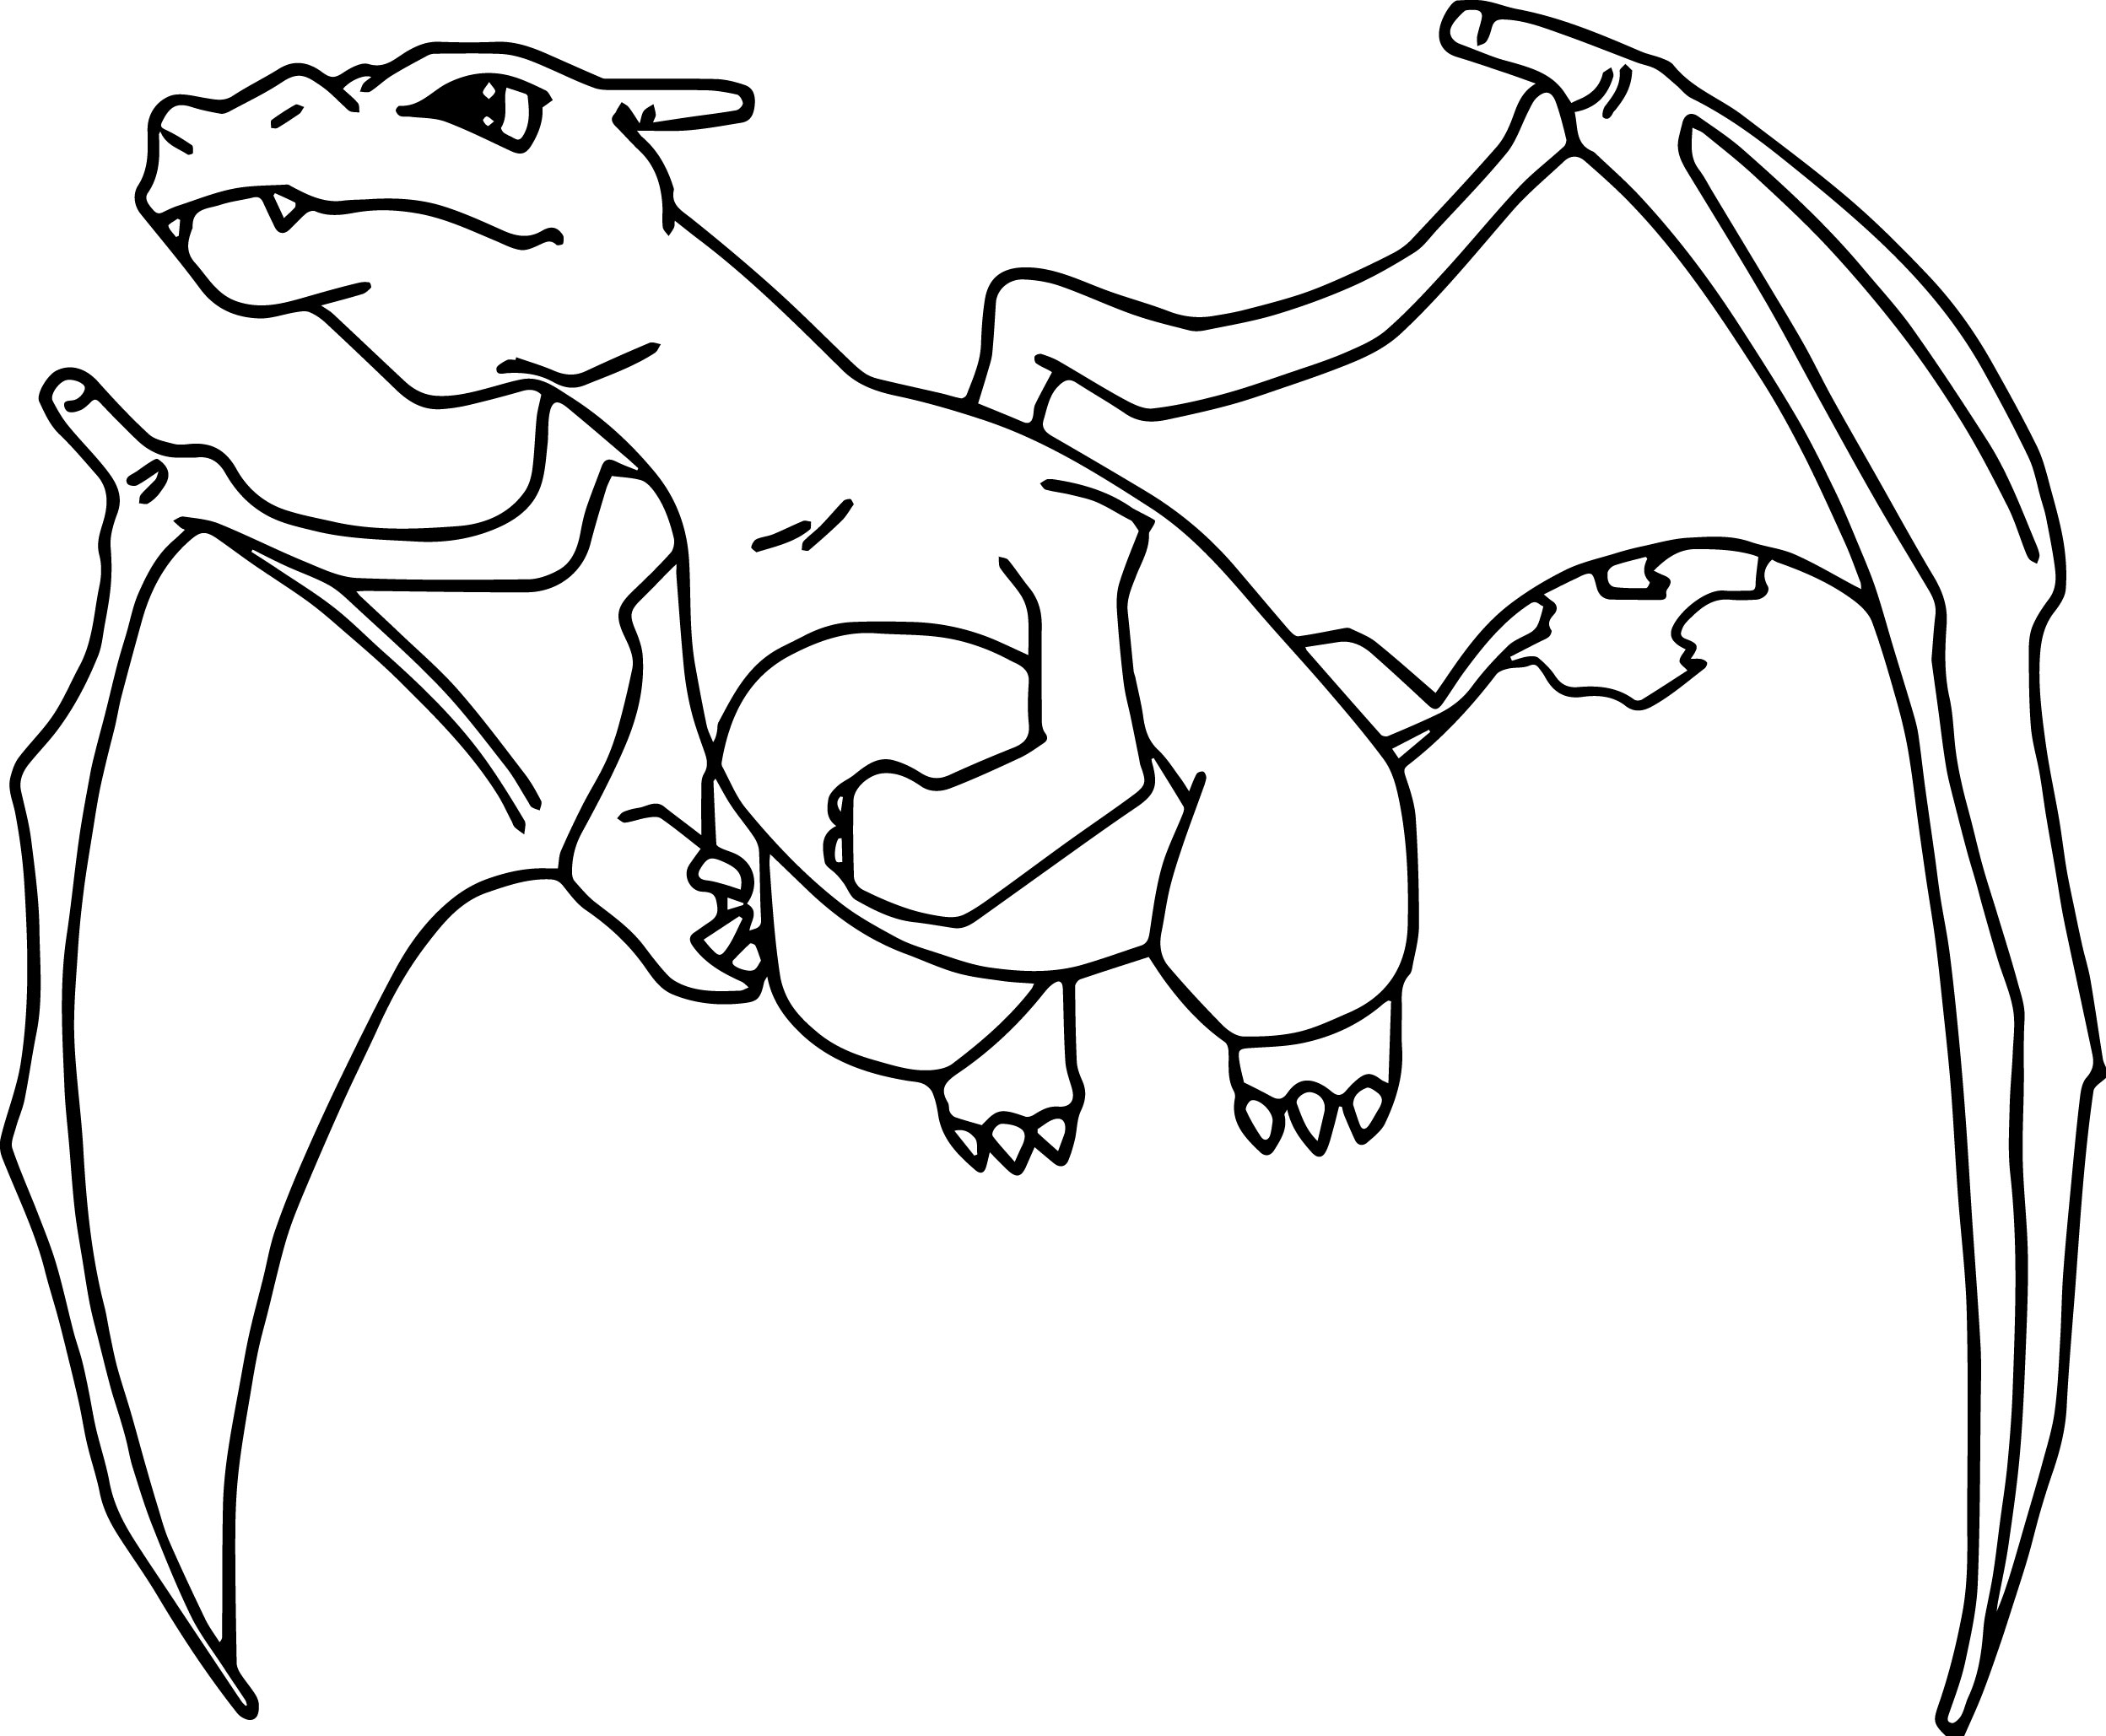 pokemon coloring pages charizard charizard coloring pages to download and print for free pokemon coloring pages charizard 